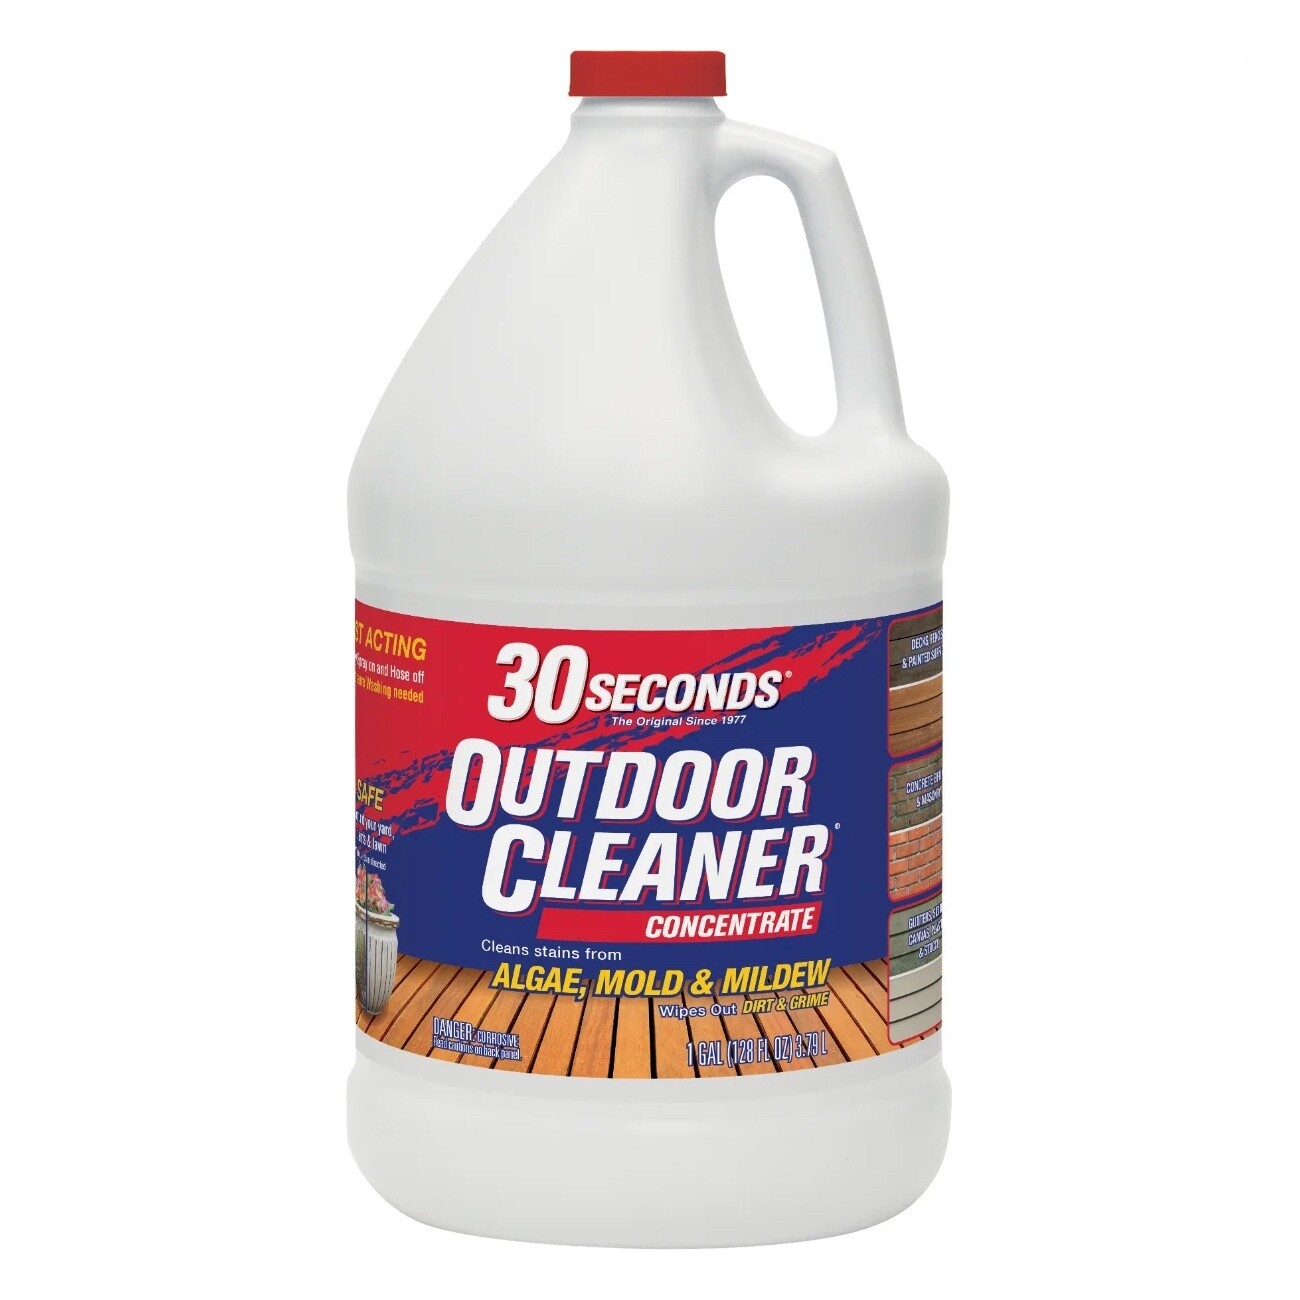 30 Seconds Outdoor Cleaner Concentrate 1 Gallon